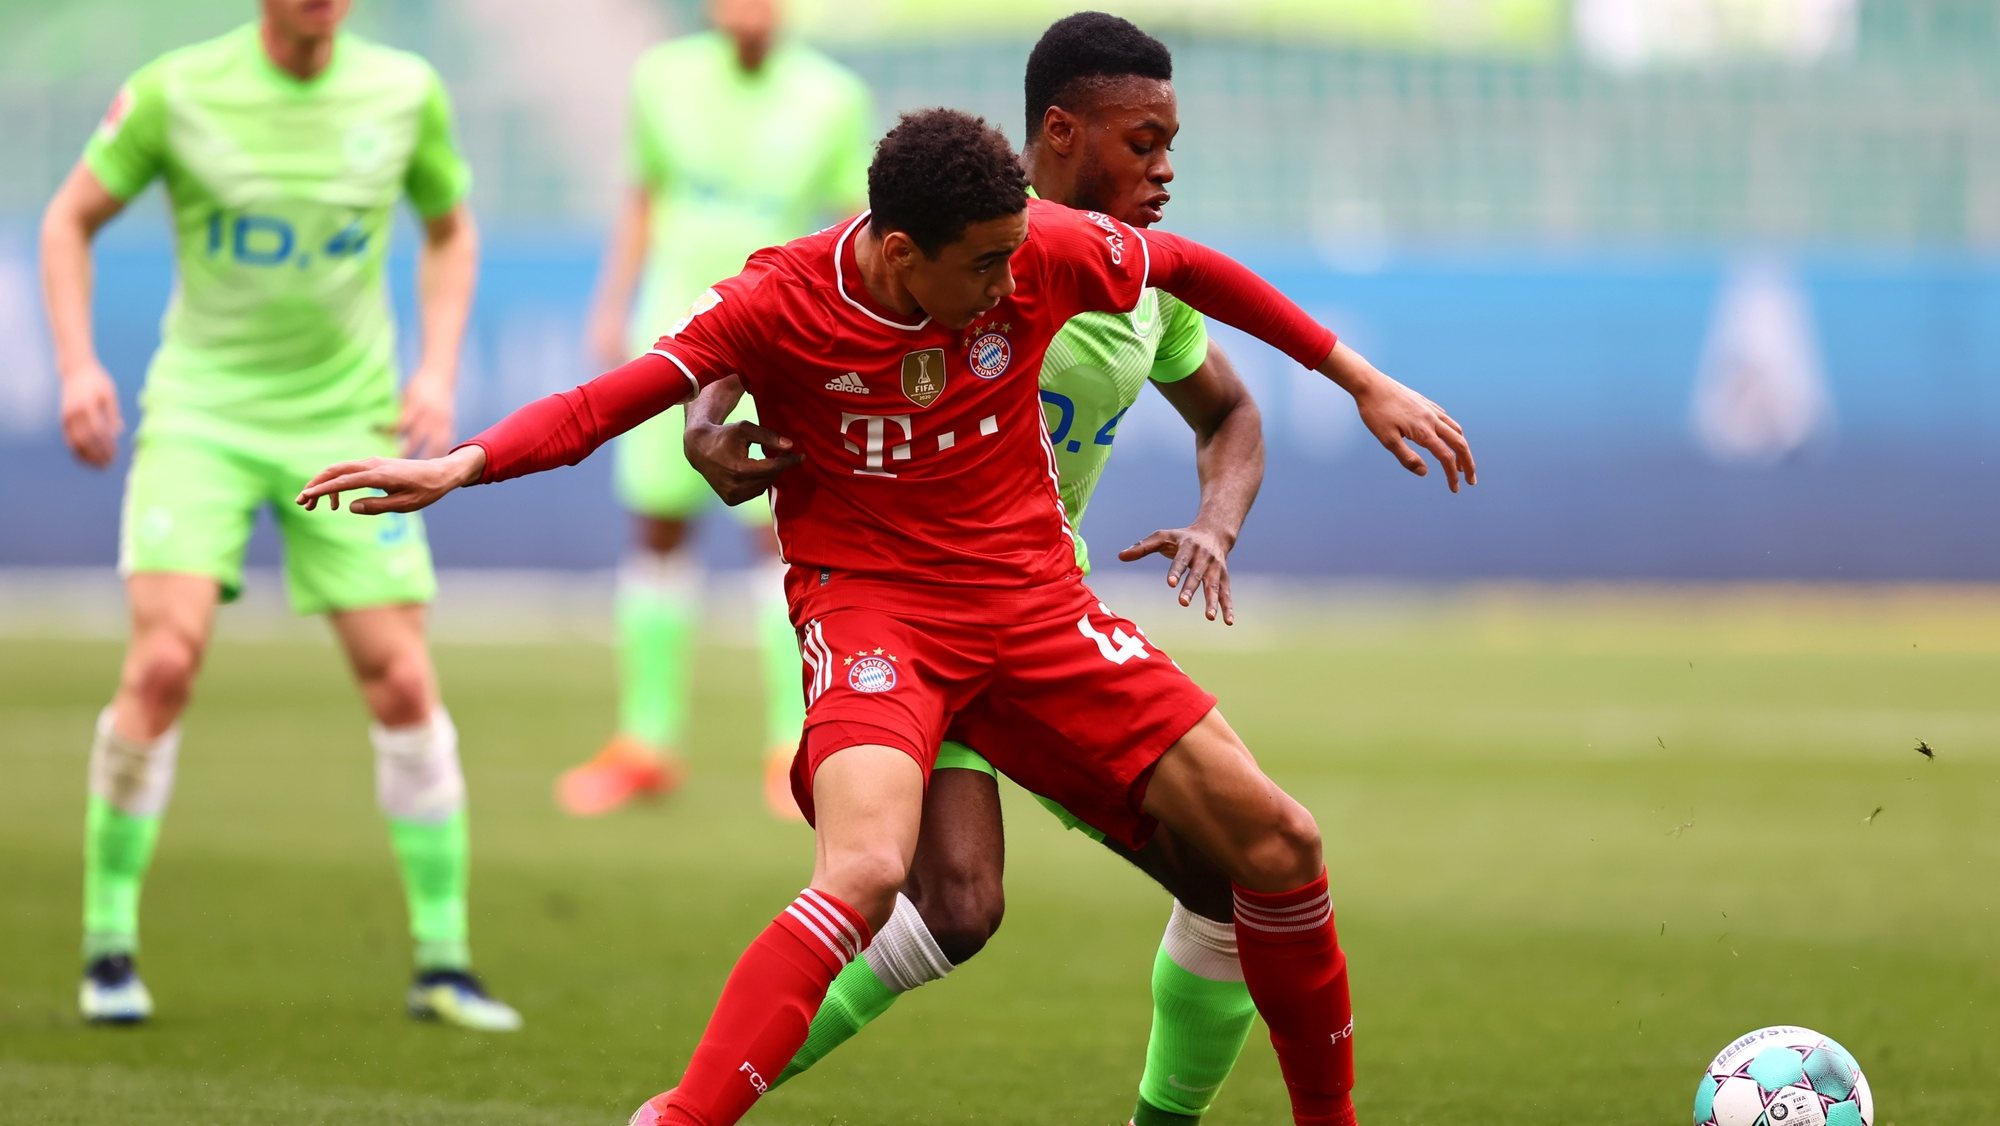 epa09141521 Jamal Musiala (L) of FC Bayern Muenchen is challenged by Ridle Baku of VfL Wolfsburg during the Bundesliga match between VfL Wolfsburg and FC Bayern Munich at Volkswagen Arena in Wolfsburg, Germany, 17 April 2021.  EPA/MARTIN ROSE / POOL DFL regulations prohibit any use of photographs as image sequences and/or quasi-video.